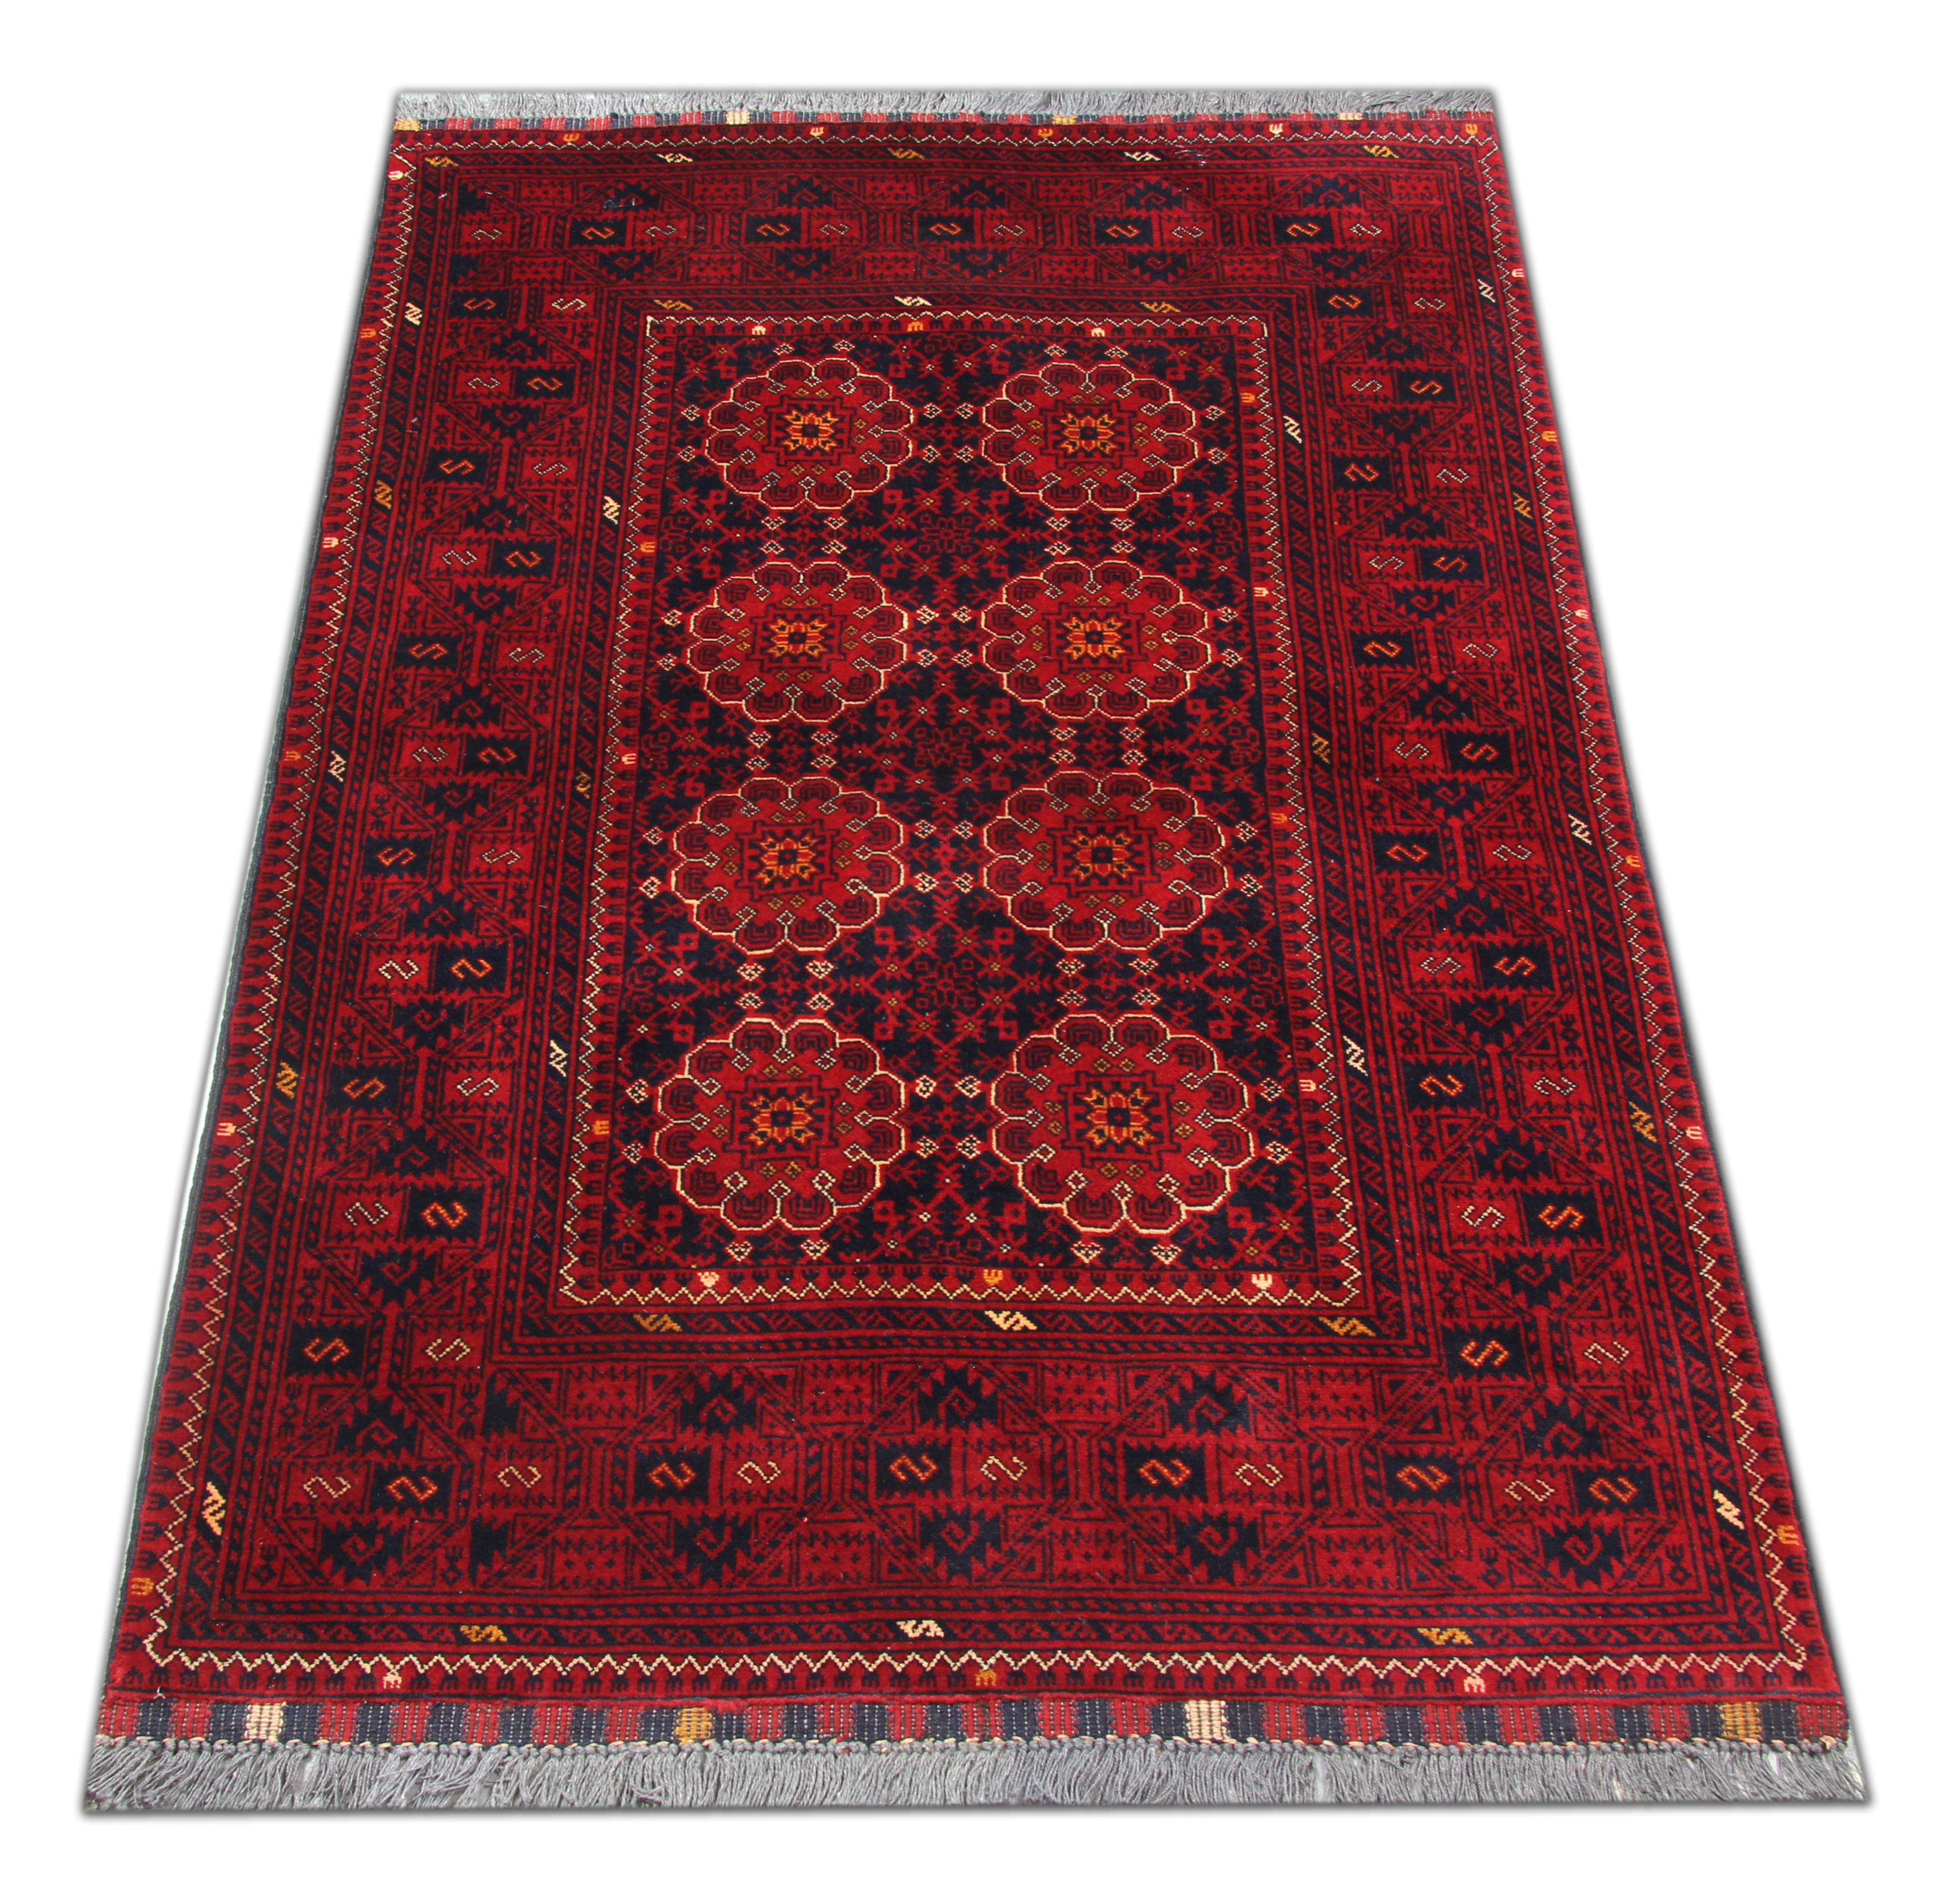 This rug is a Ziegler style Sultanabad rug is a modern carpet made on looms by master weavers in Afghanistan. It is handmade with all-natural veg dyes all hand-spun wool. The large-scale design makes Sultanabad regarded as the most appealing to